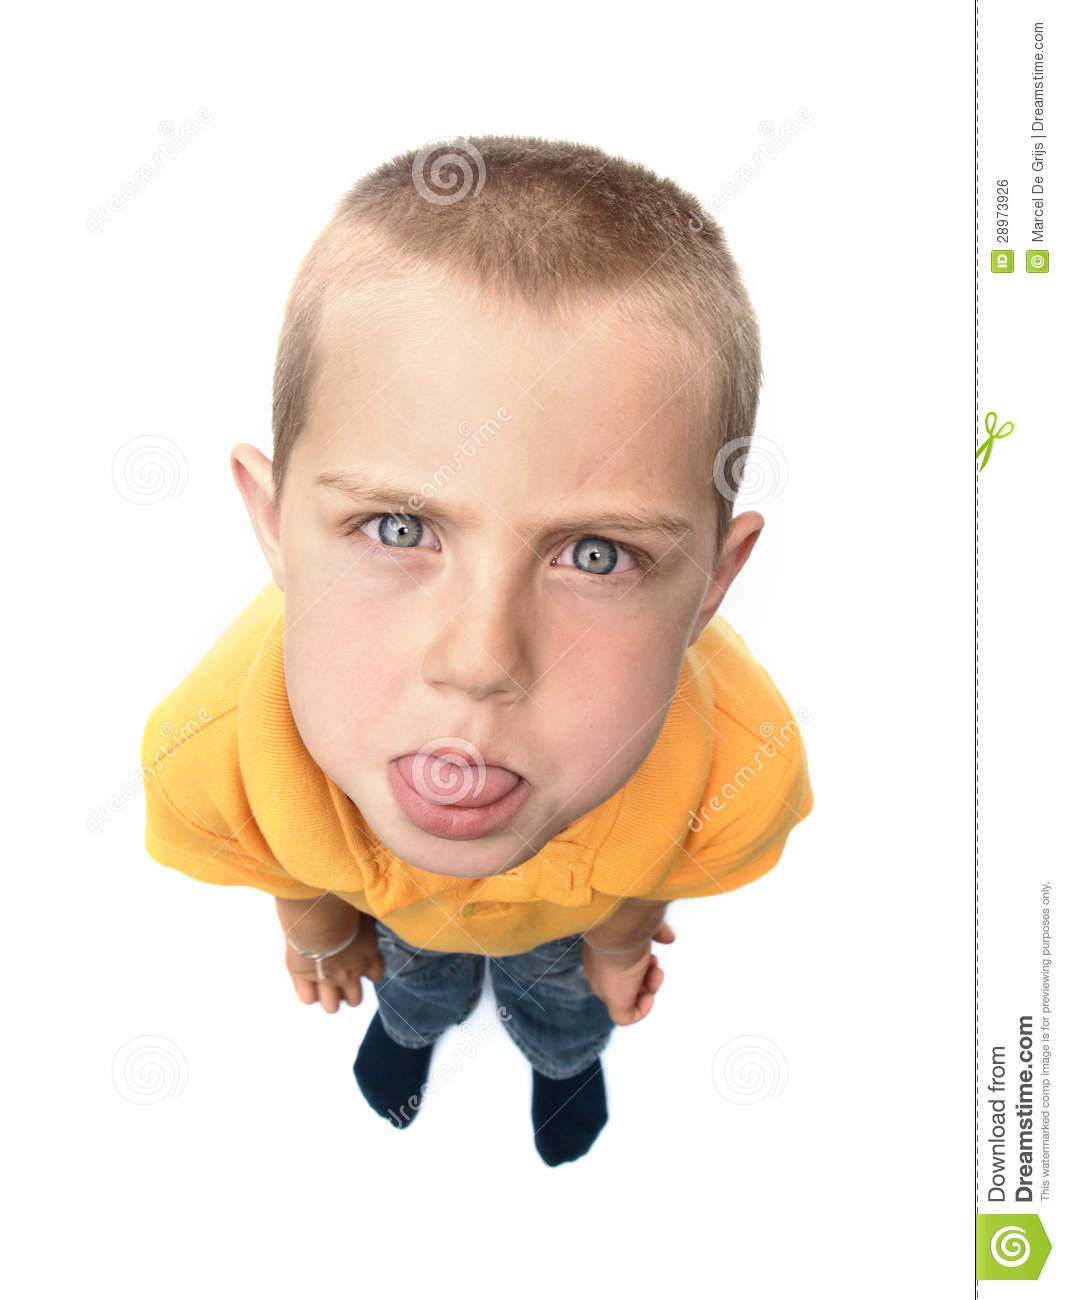 Silly Boy Royalty Free Stock Image   Image  28973926